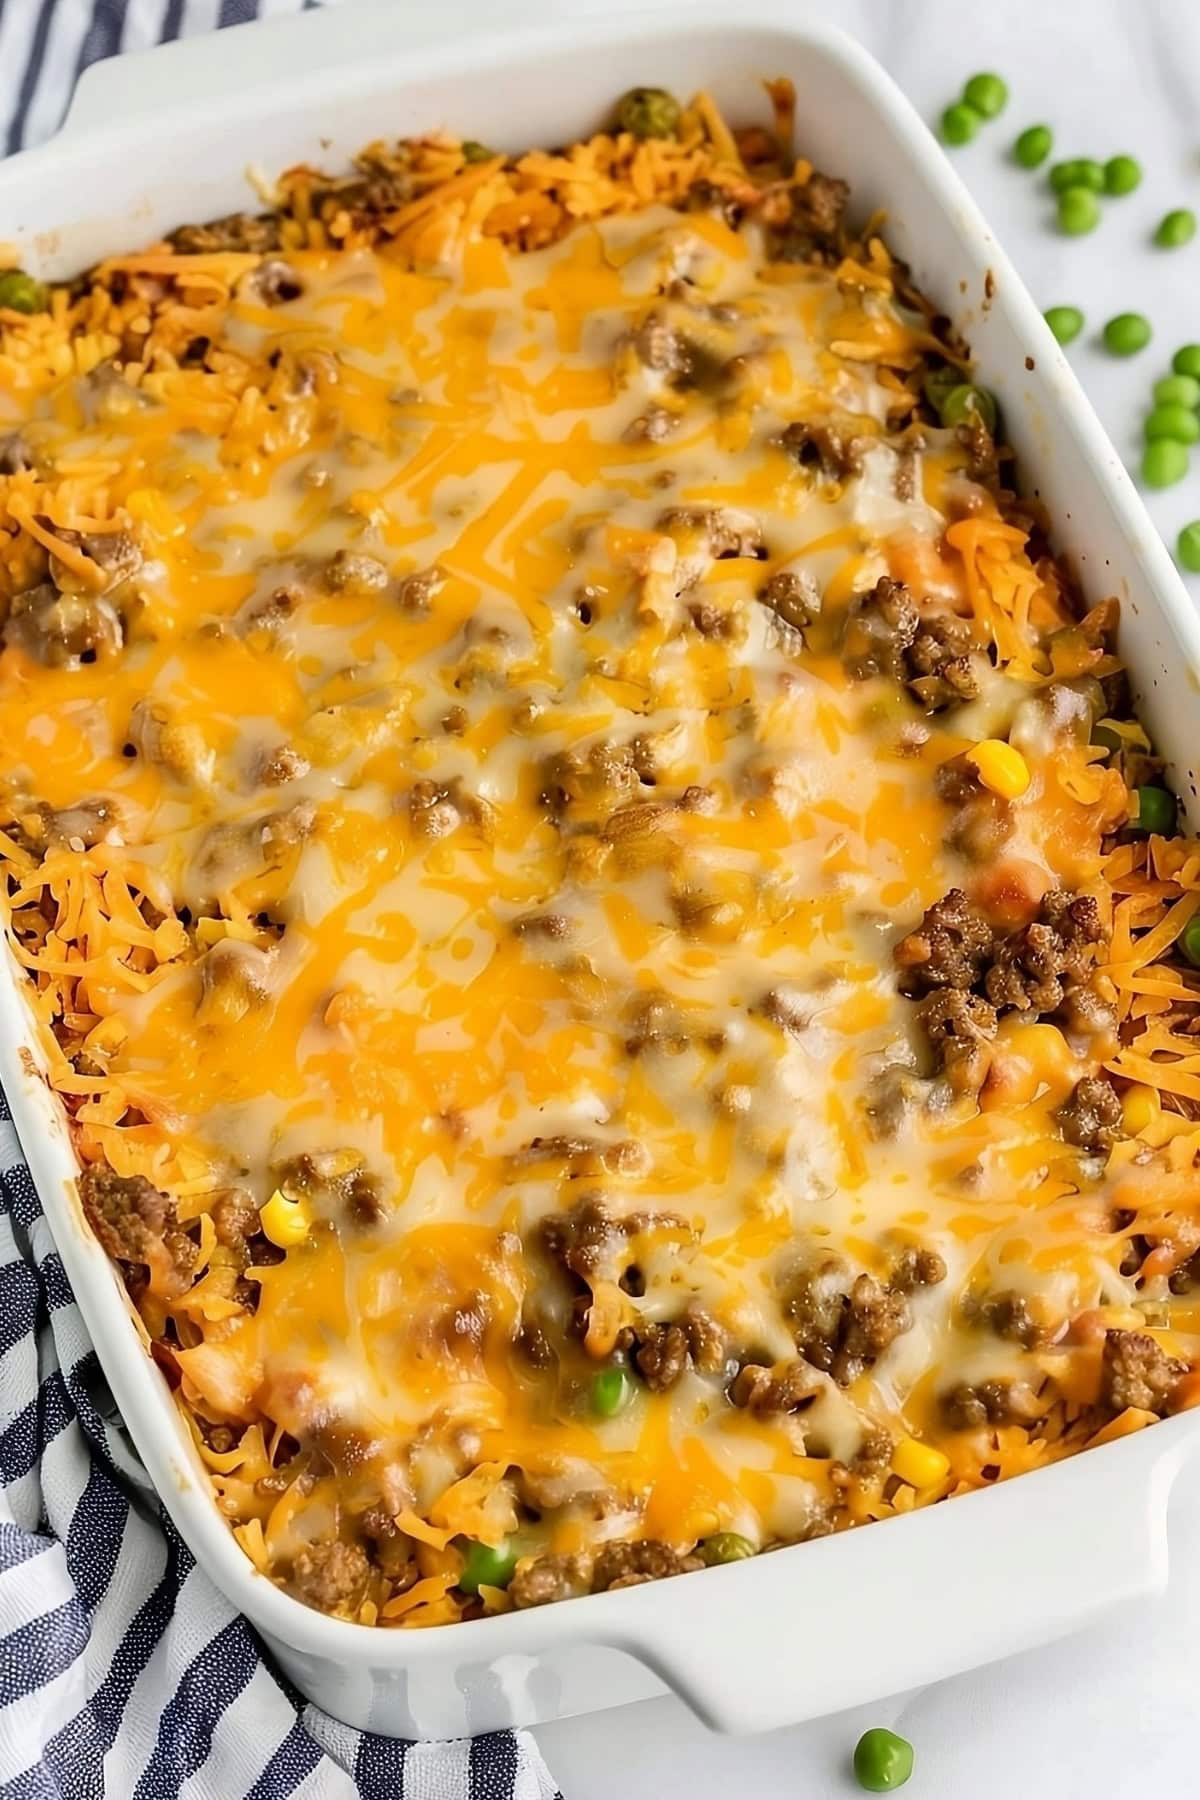 Hamburger hashbrown casserole with melted cheese on top.